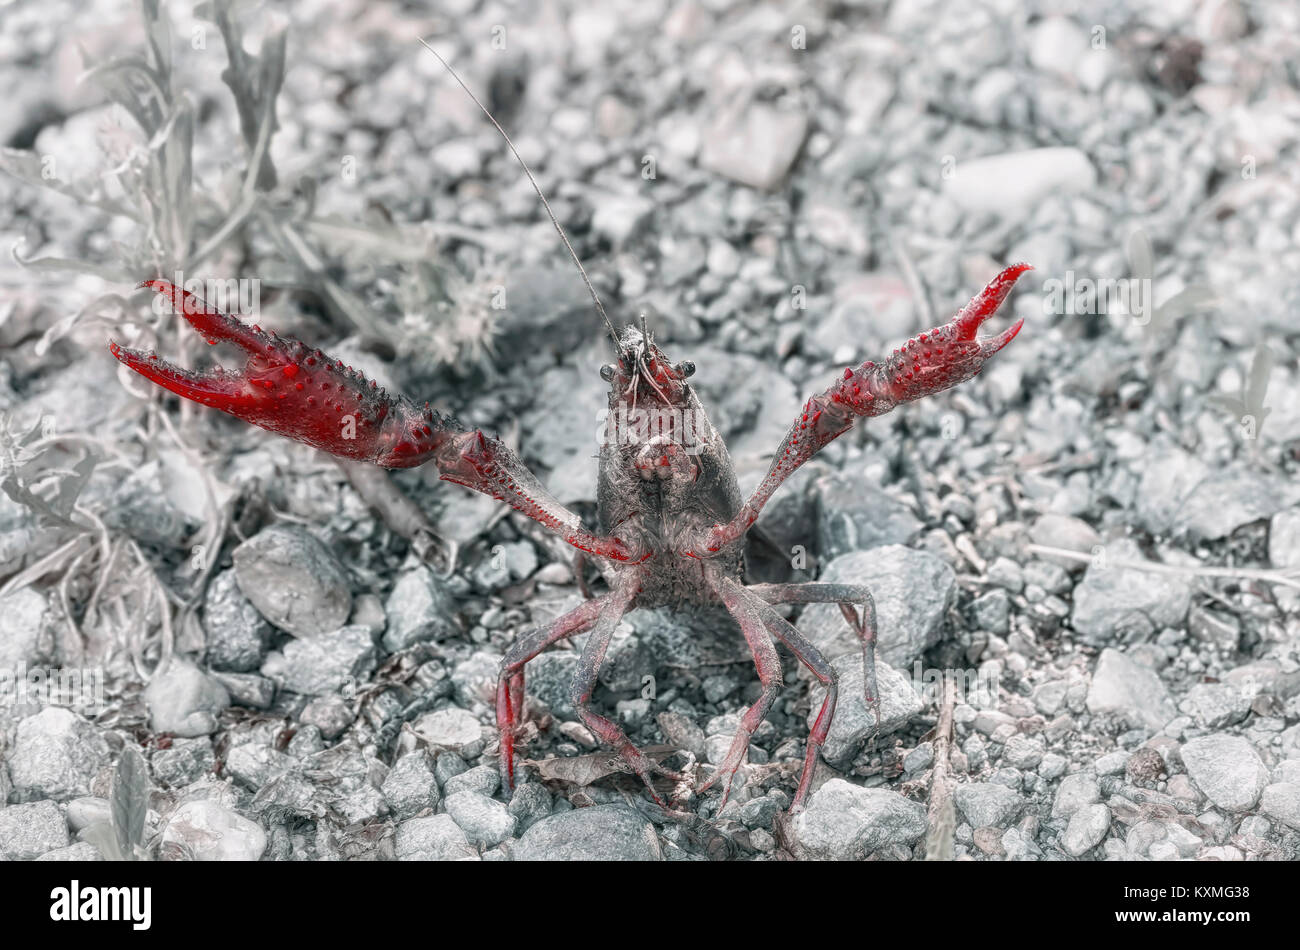 Procambarus clarkii. American crayfish in aggressive position with the pincers opened, over little stones of a road, near to the riverside. Red color  Stock Photo